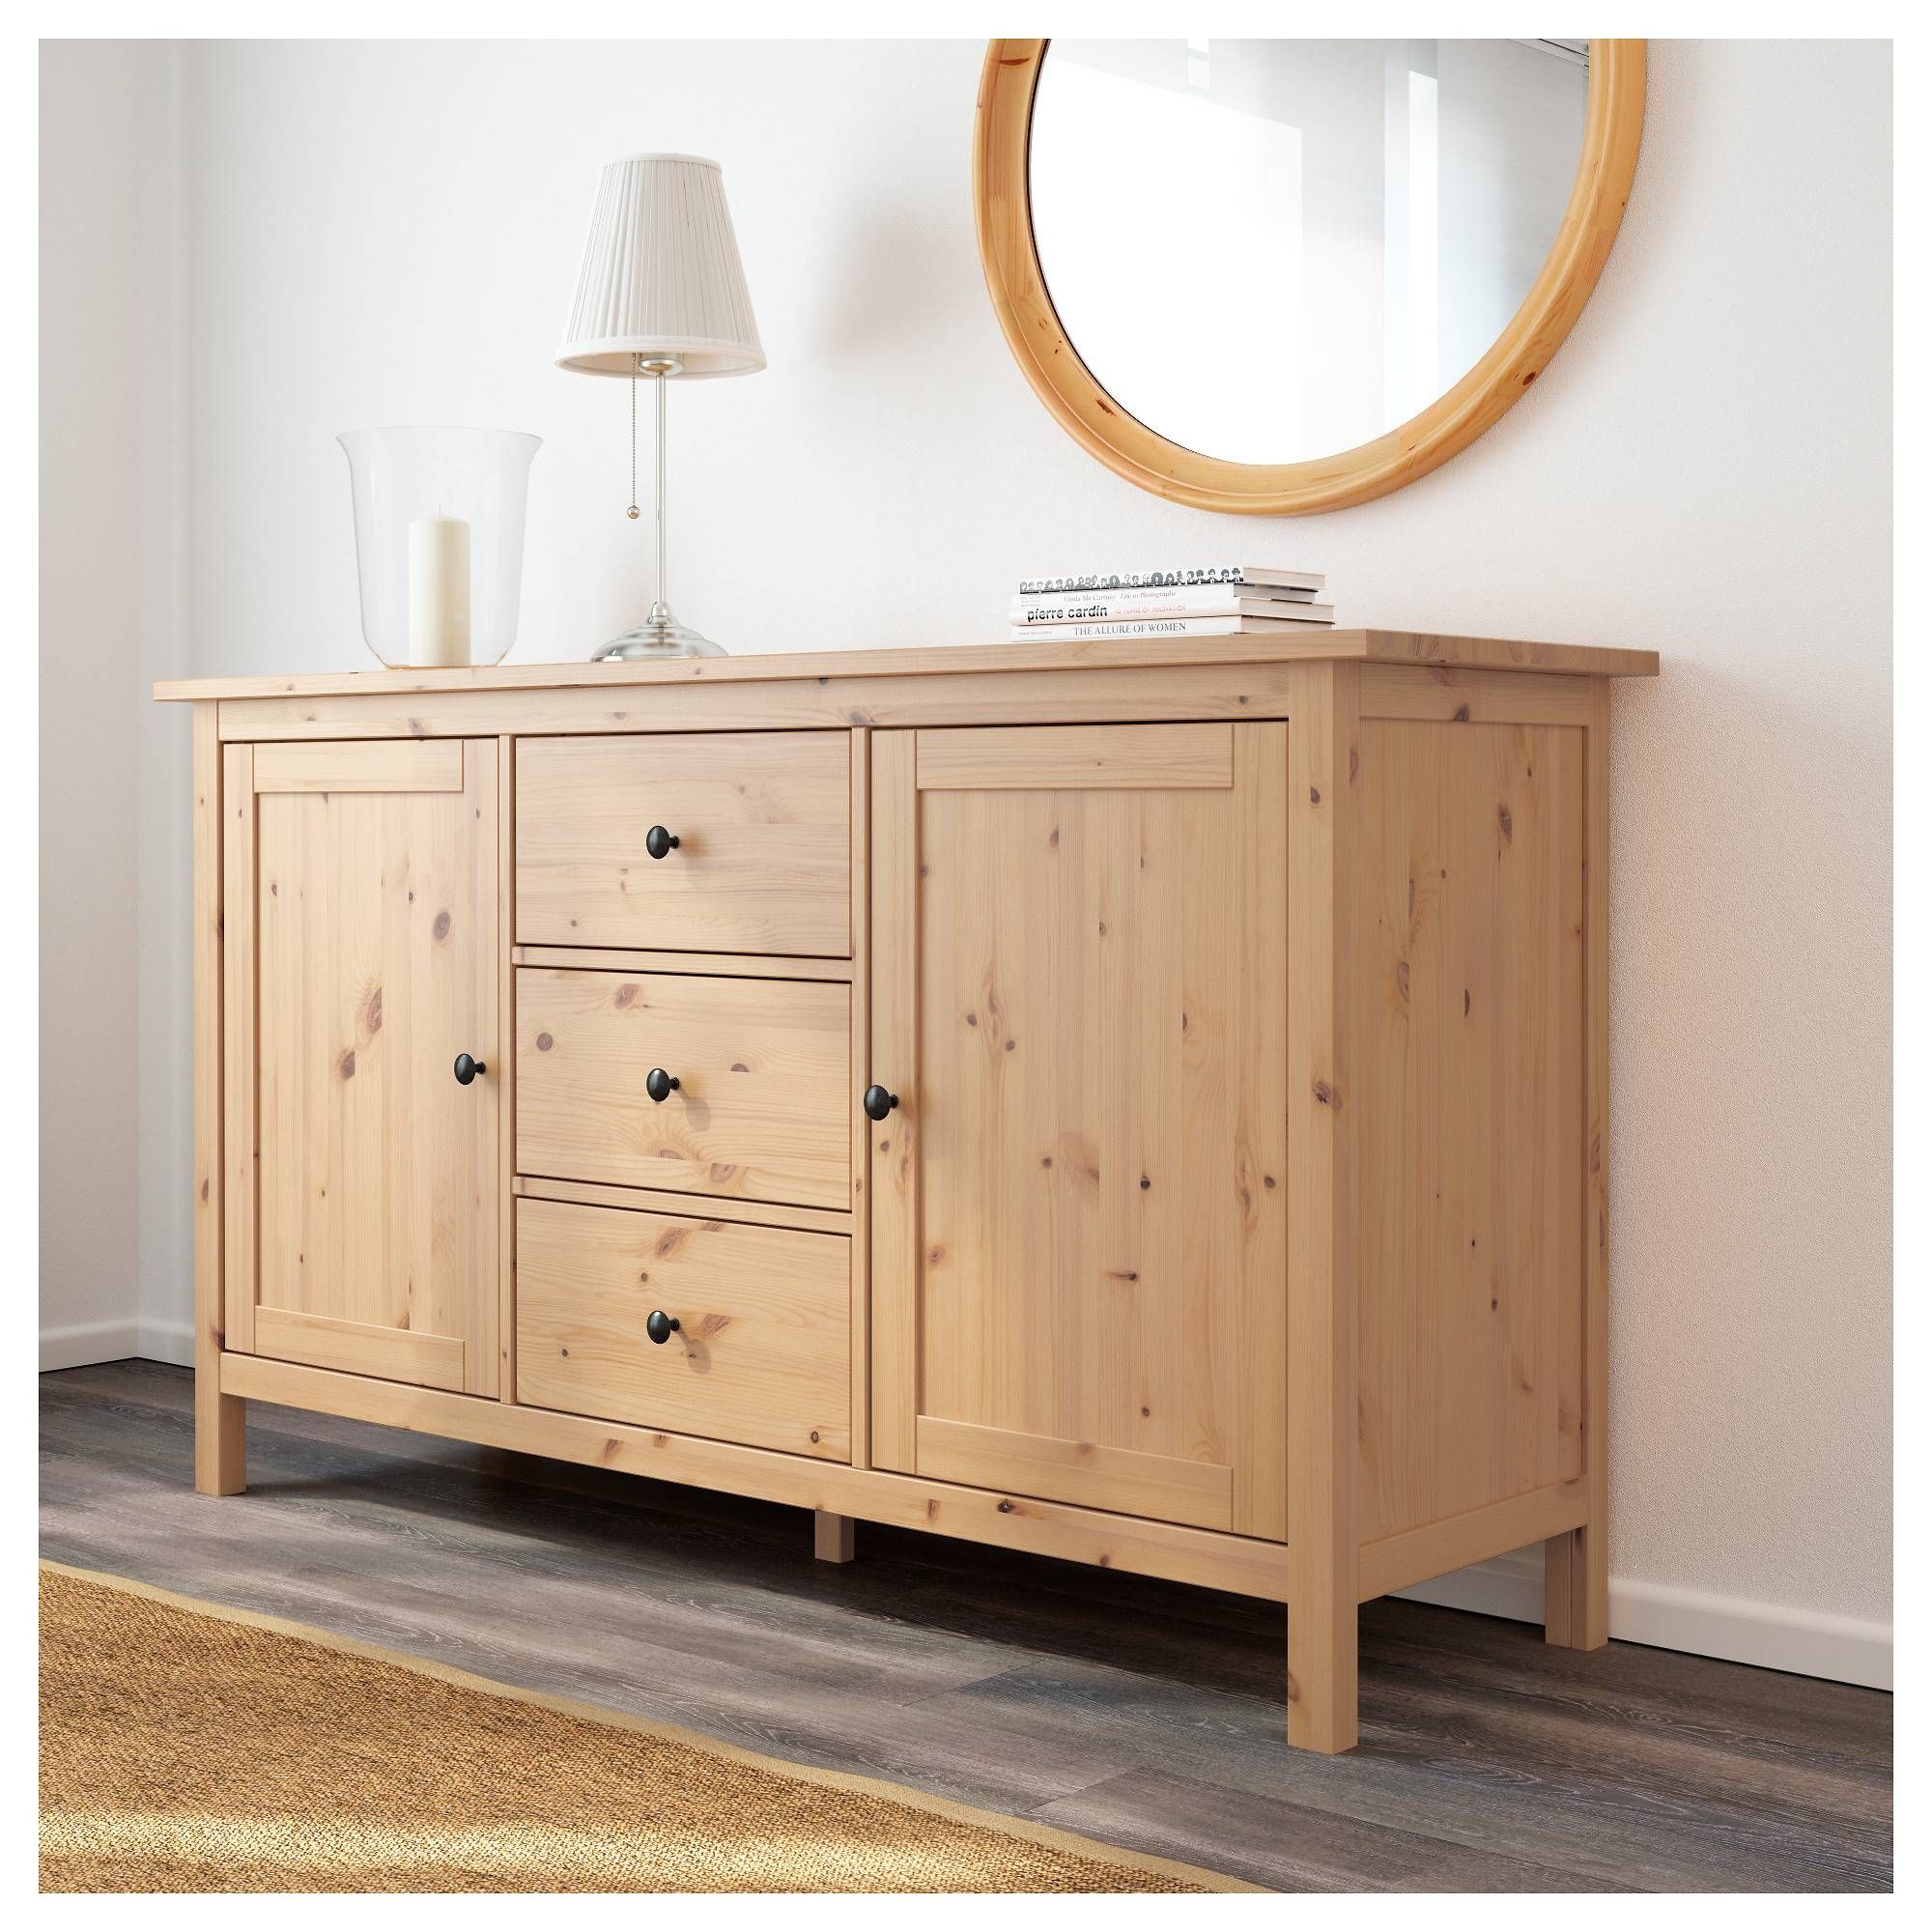 Hemnes Sideboard – White Stain – Ikea Within Recent Canada Ikea Sideboards (View 13 of 15)